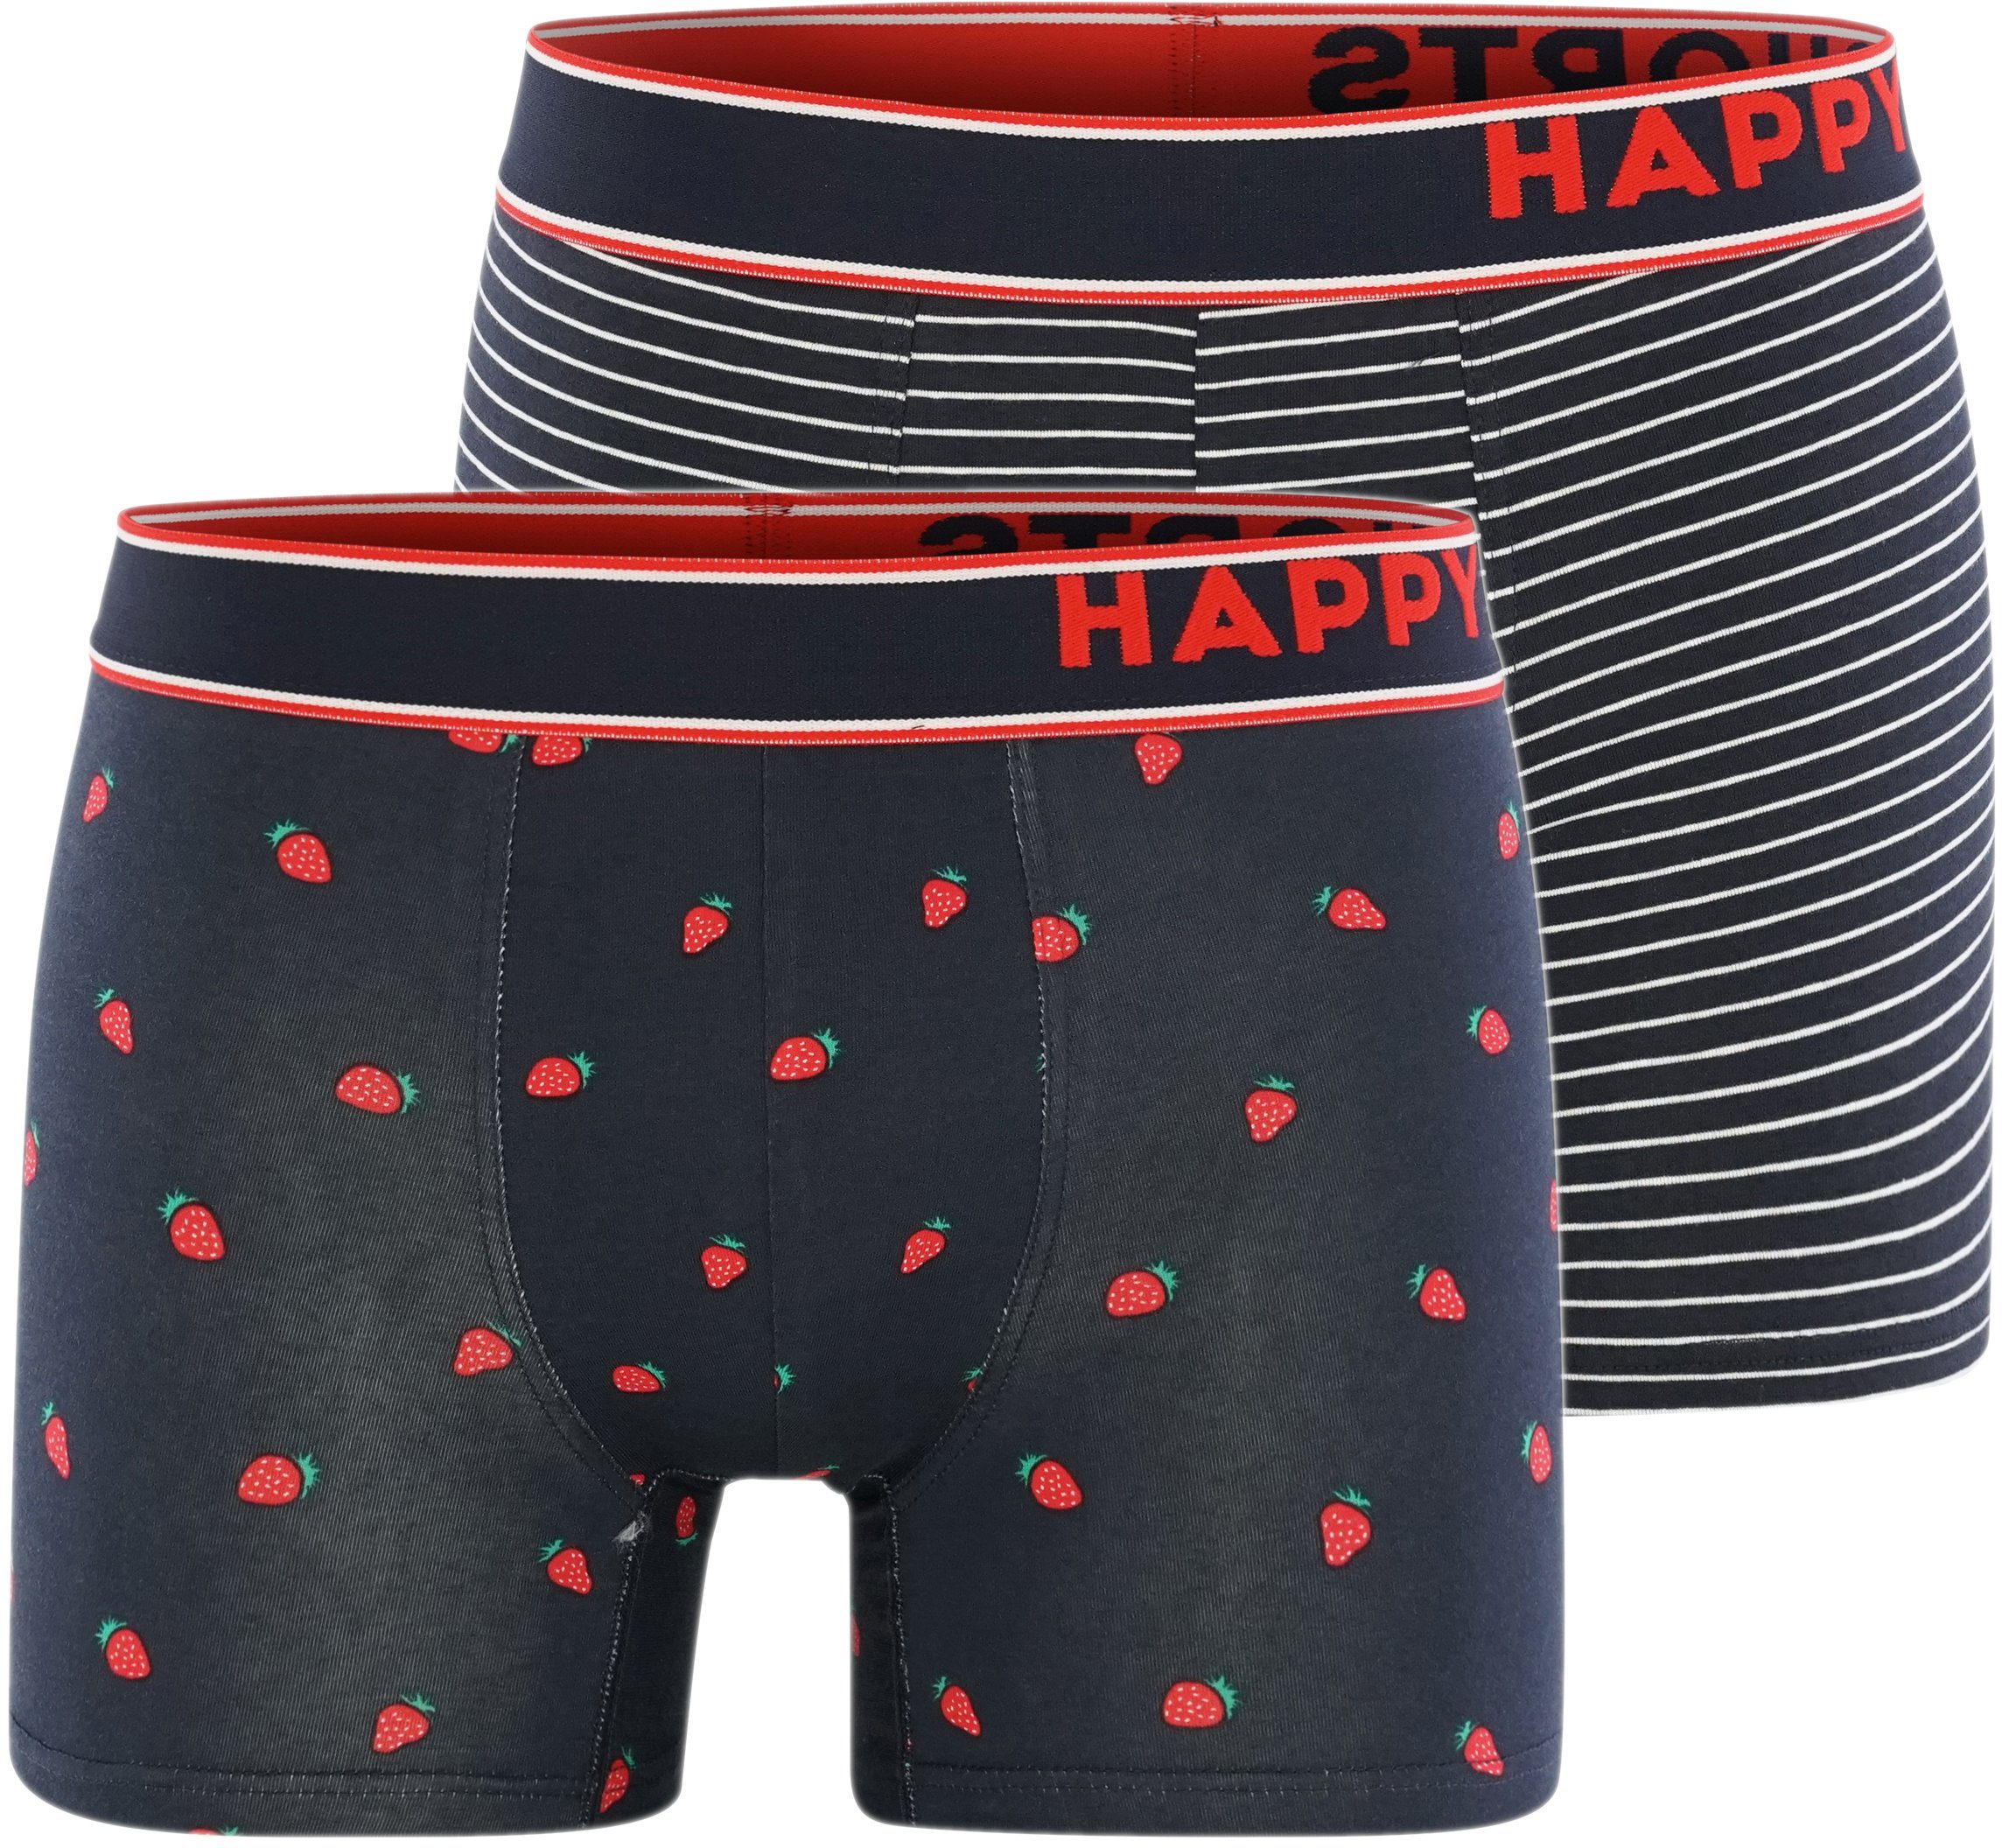 HAPPY SHORTS Stripe and (2-St) Strawberries Retro Pants 2-Pack Trunks